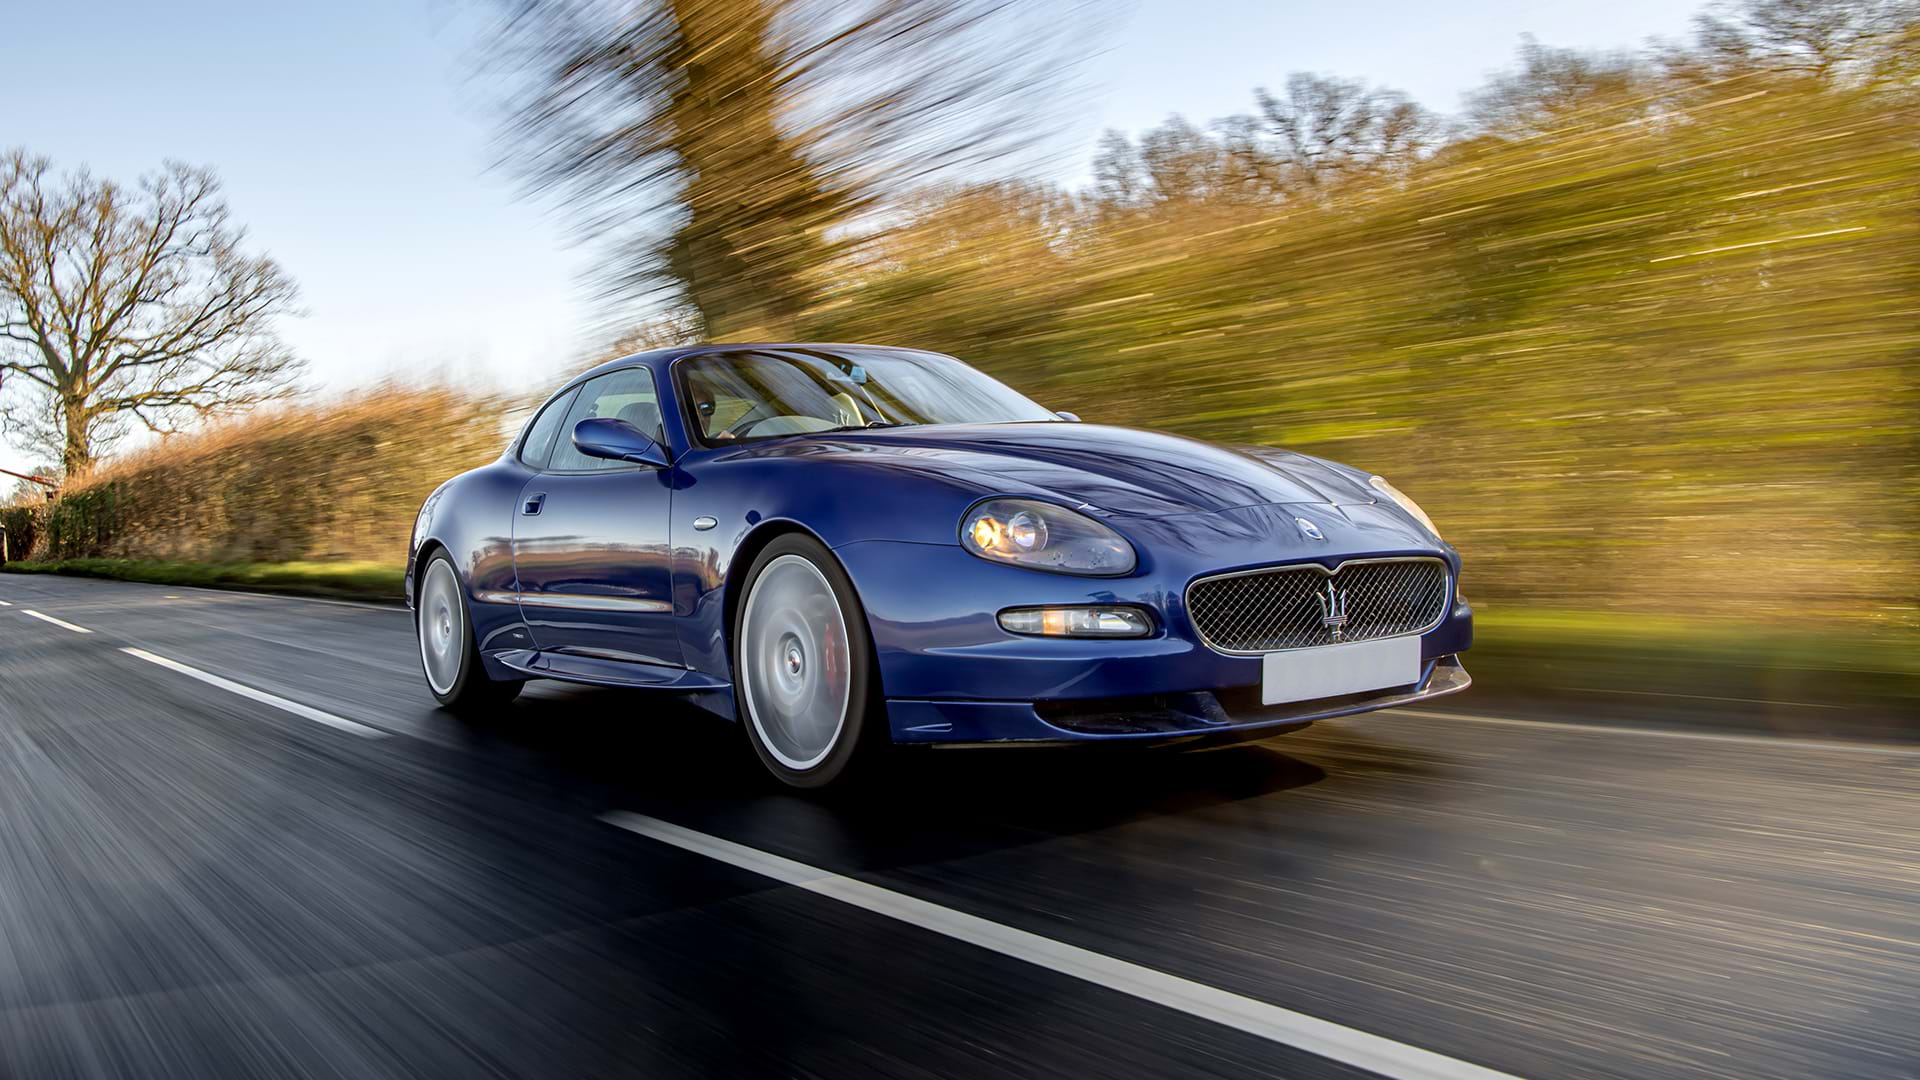 Classic Blue Maserati GranSport driving along a country road with blue skies overhead.